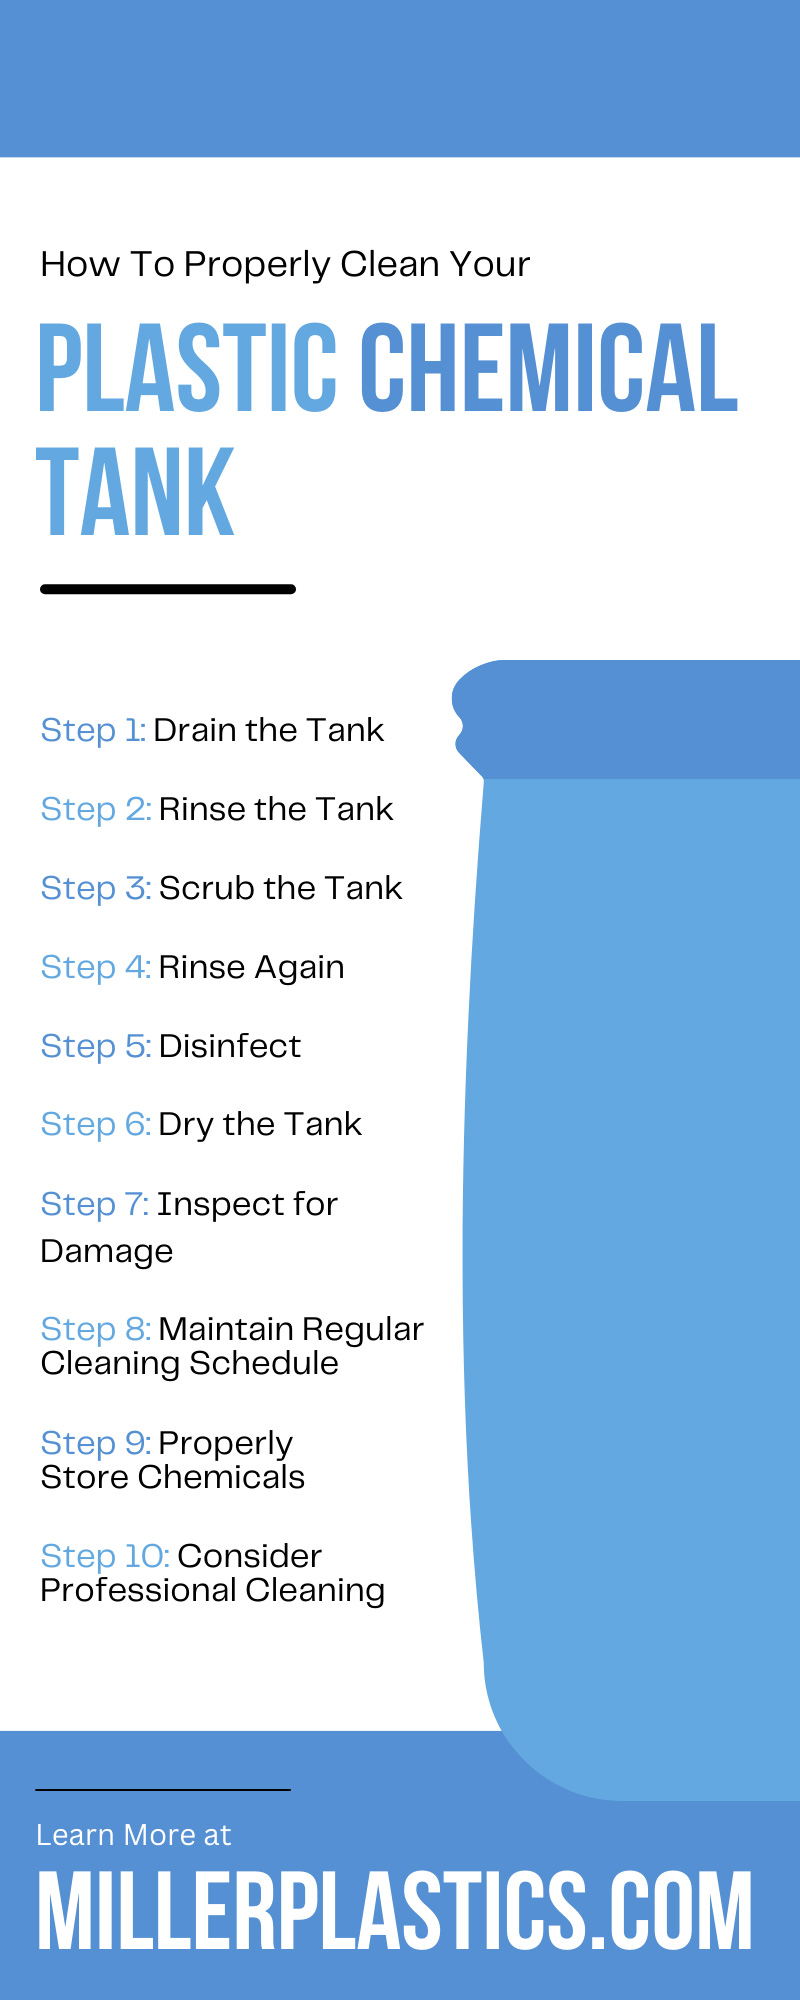 How To Properly Clean Your Plastic Chemical Tank